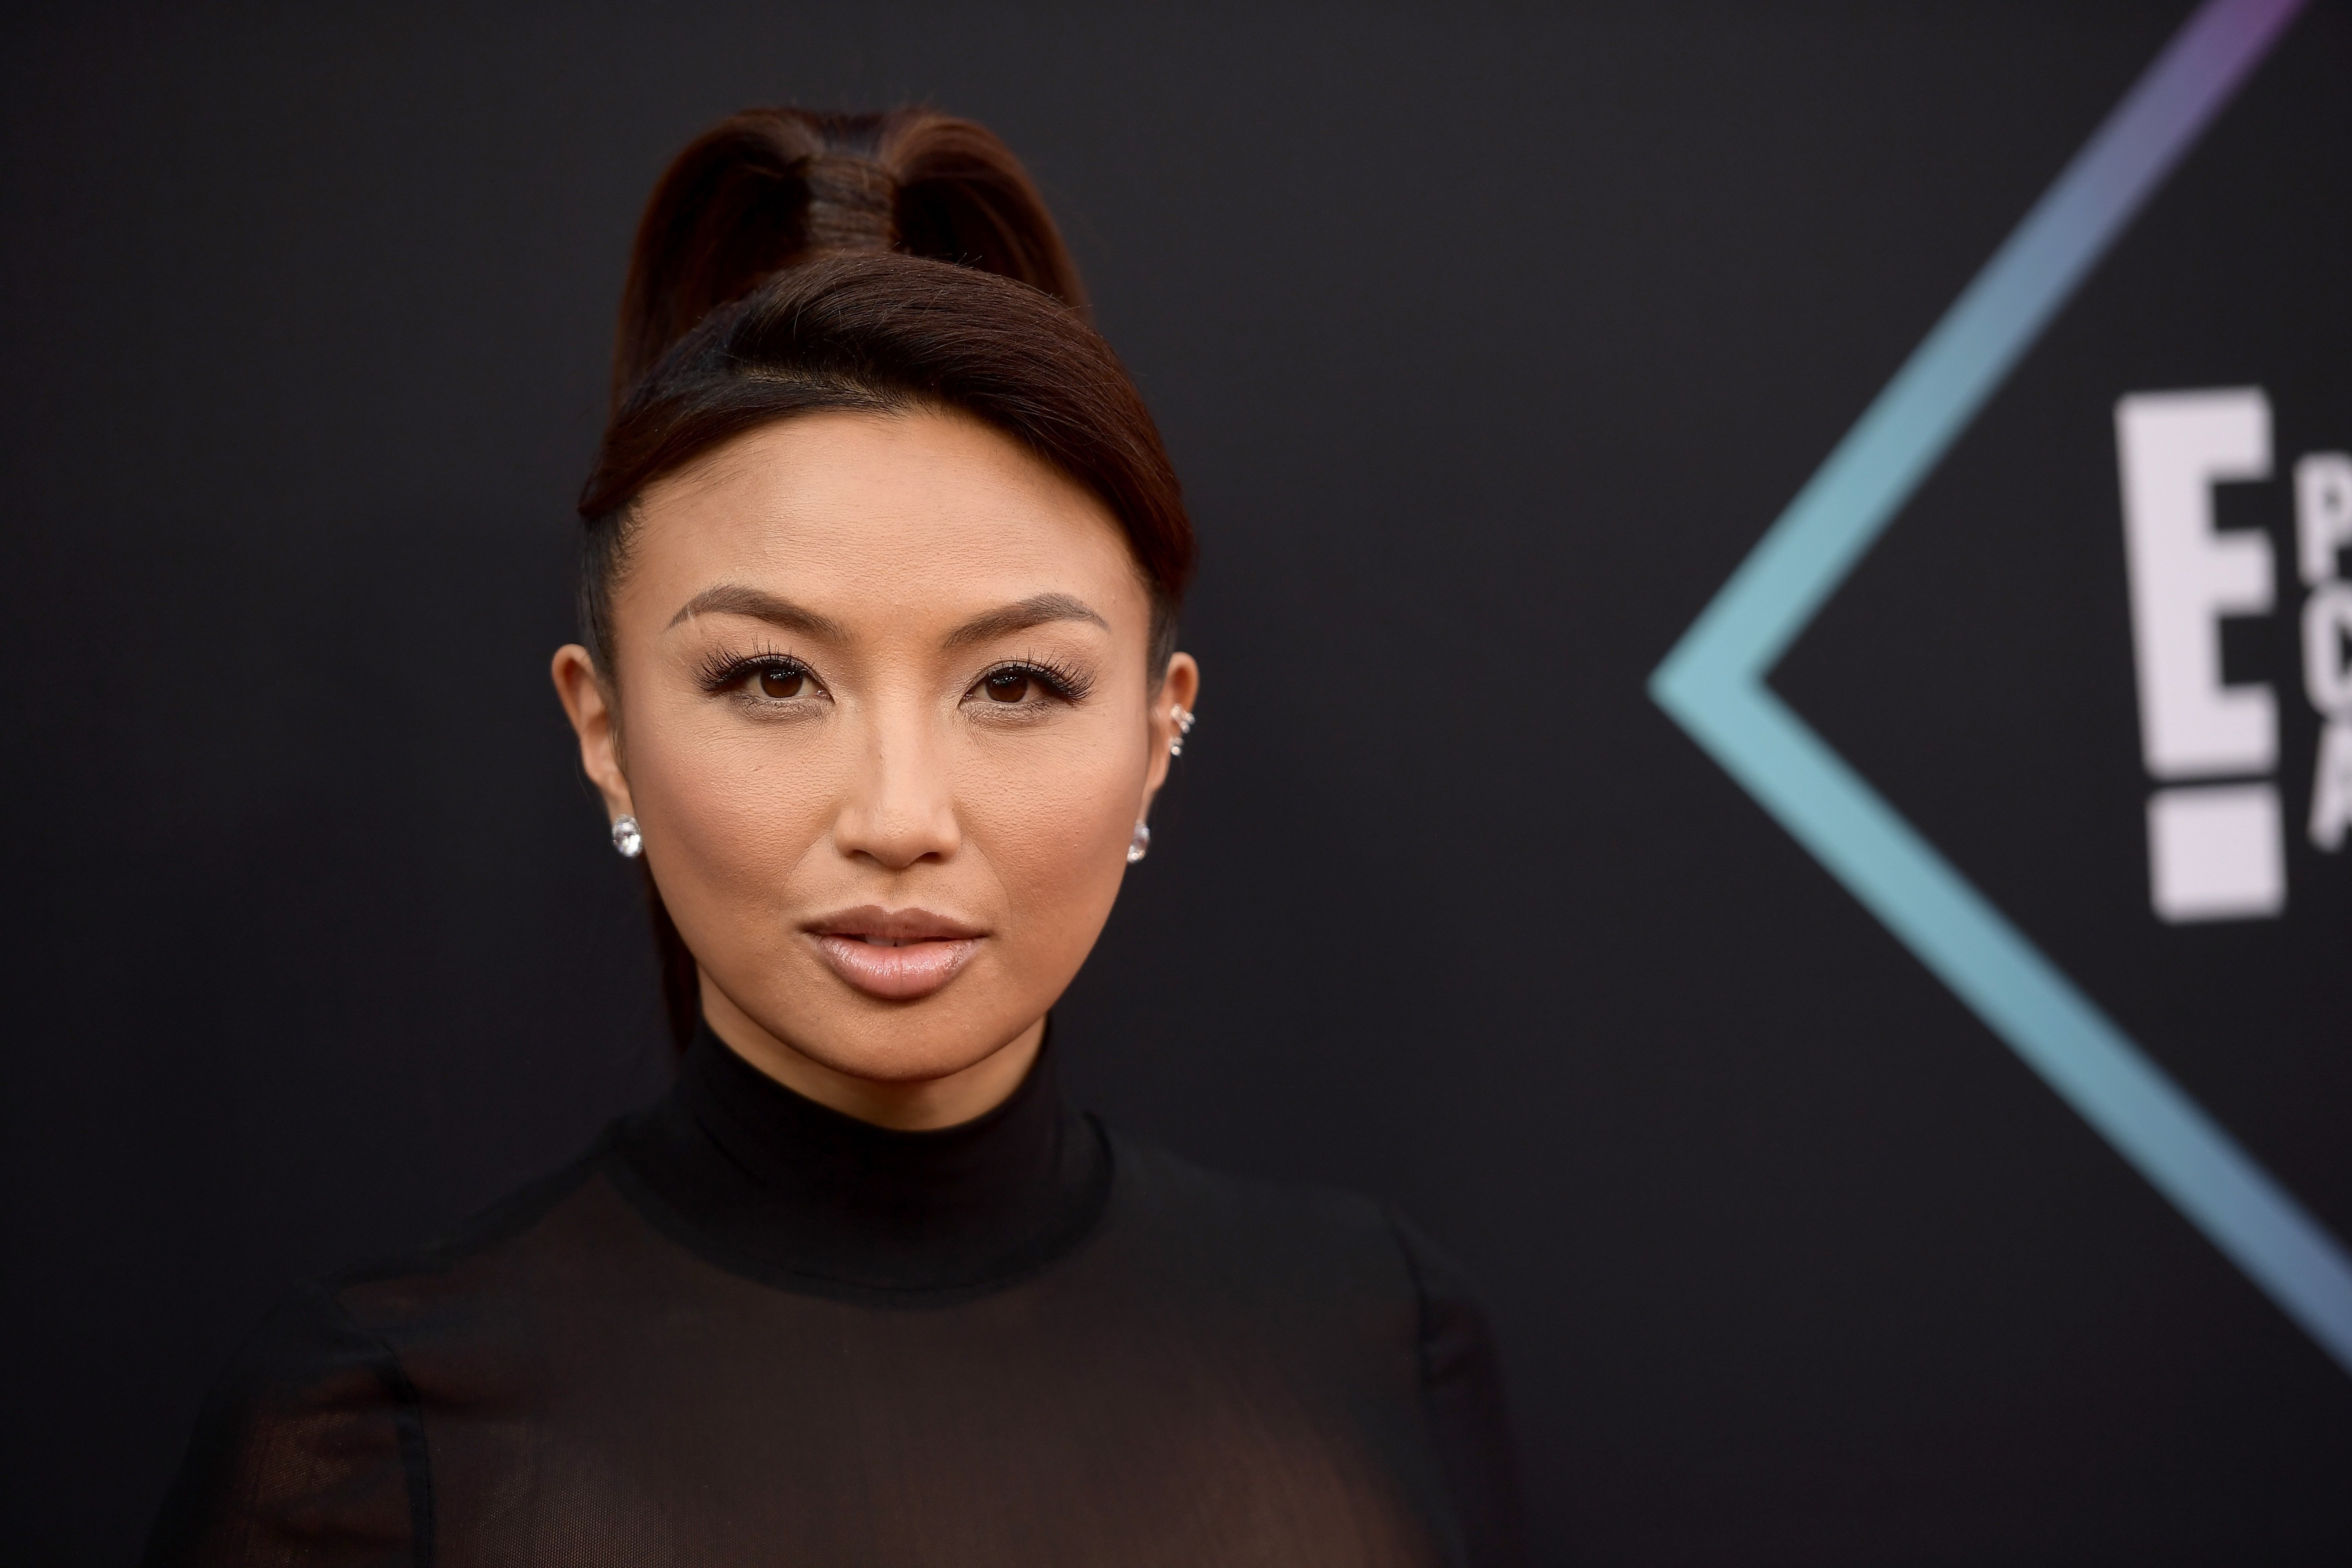 Jeannie Mai attends the People's Choice Awards 2018 at Barker Hangar on November 11, 2018 | Photo: Getty Images